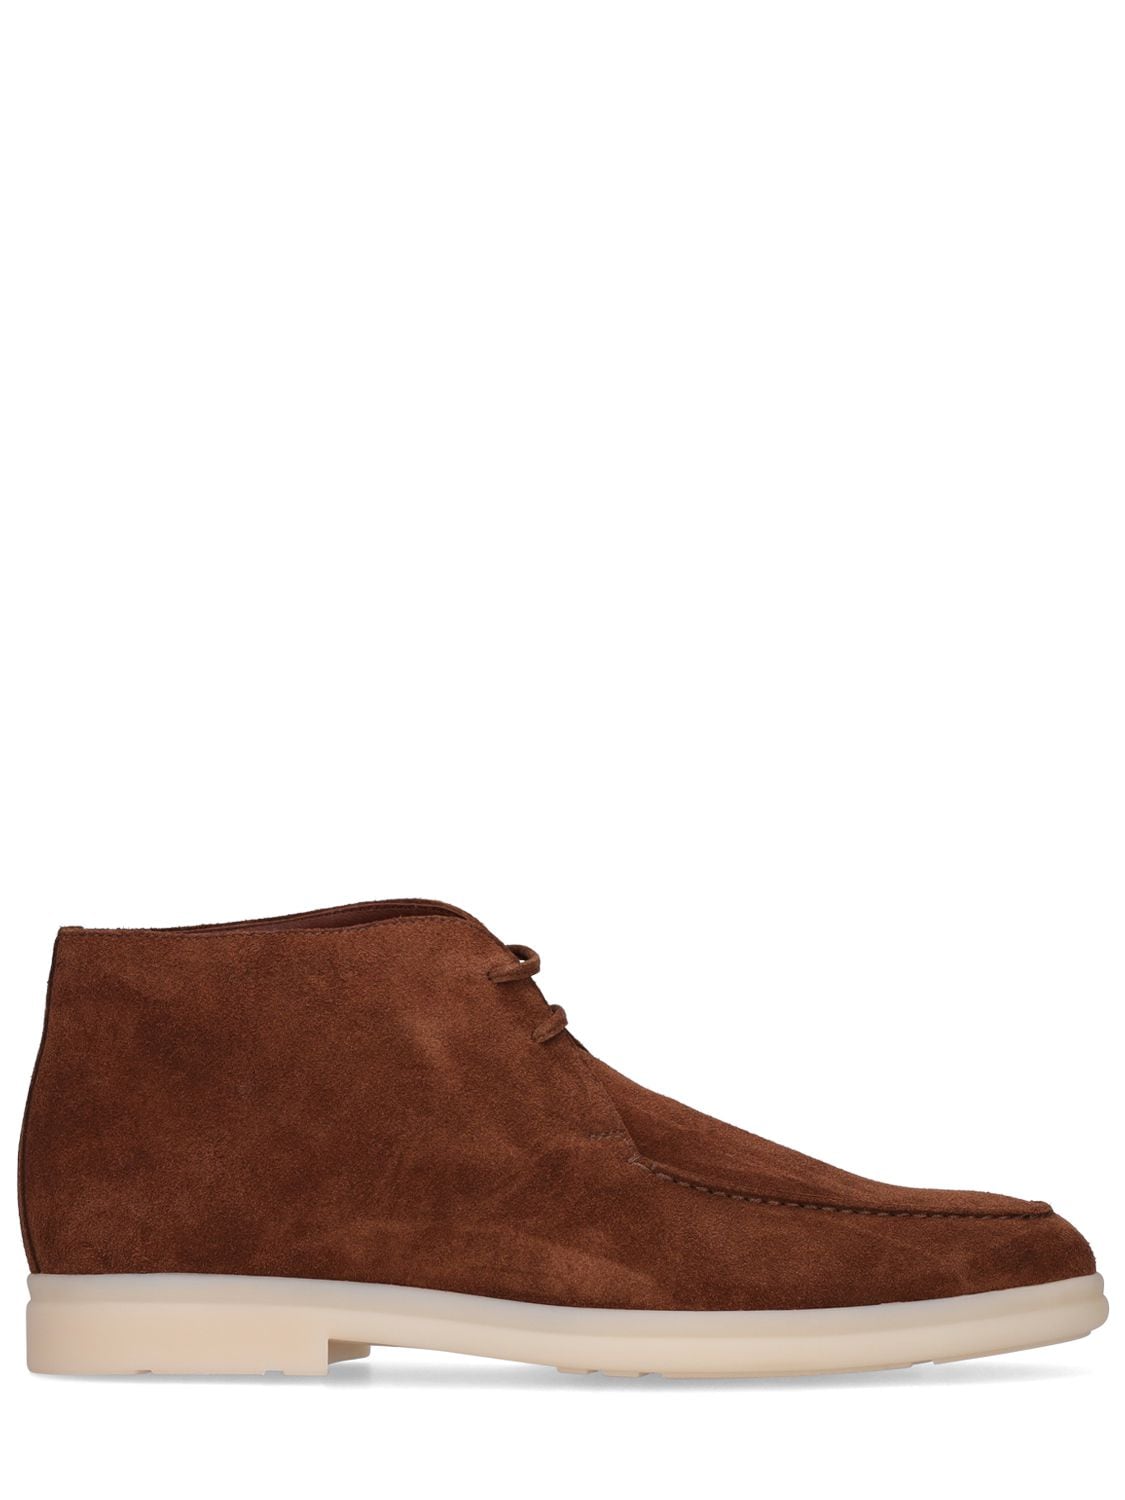 CHURCH'S GORING SUEDE LACE UP BOOTS